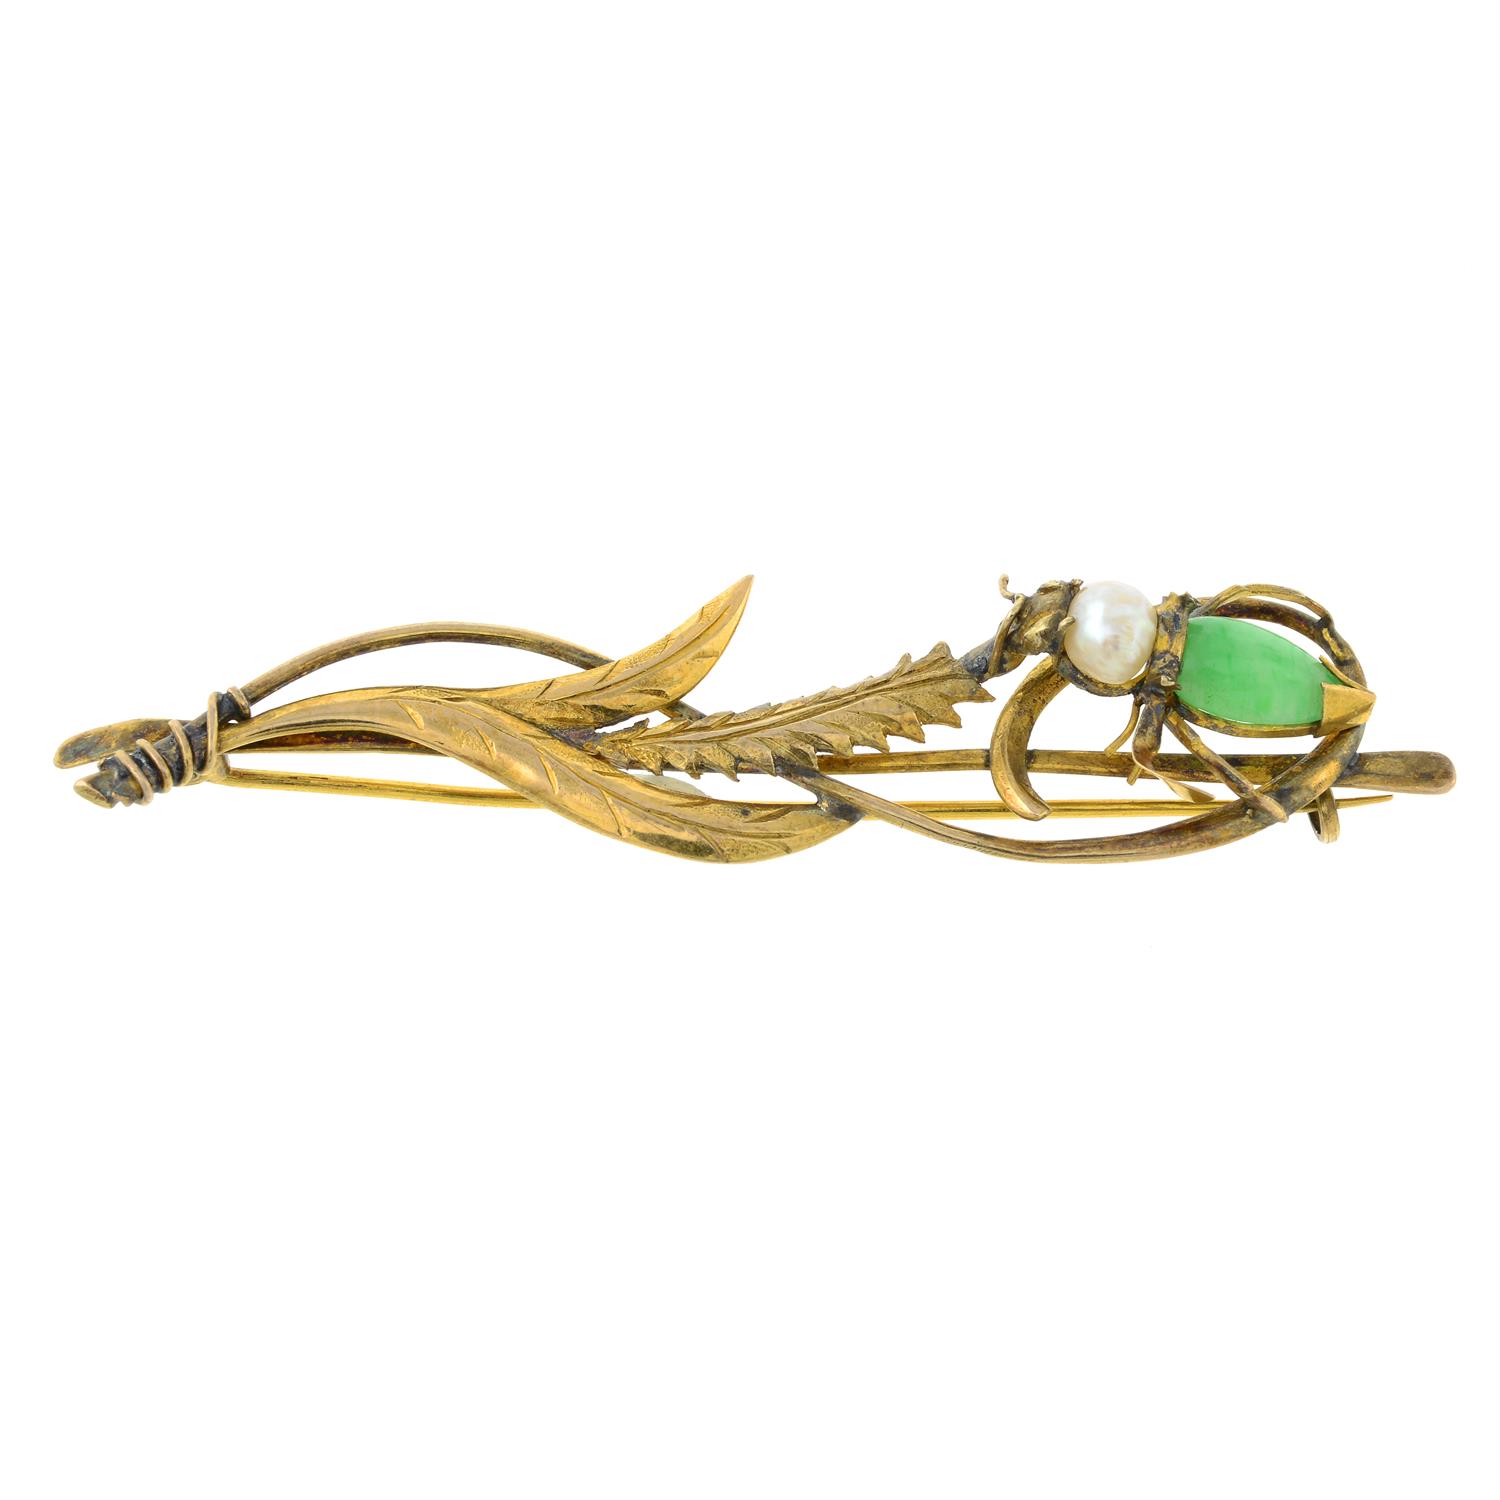 A cultured pearl and jade brooch, designed to depict an insect and scrolling foliate motif. - Image 3 of 4